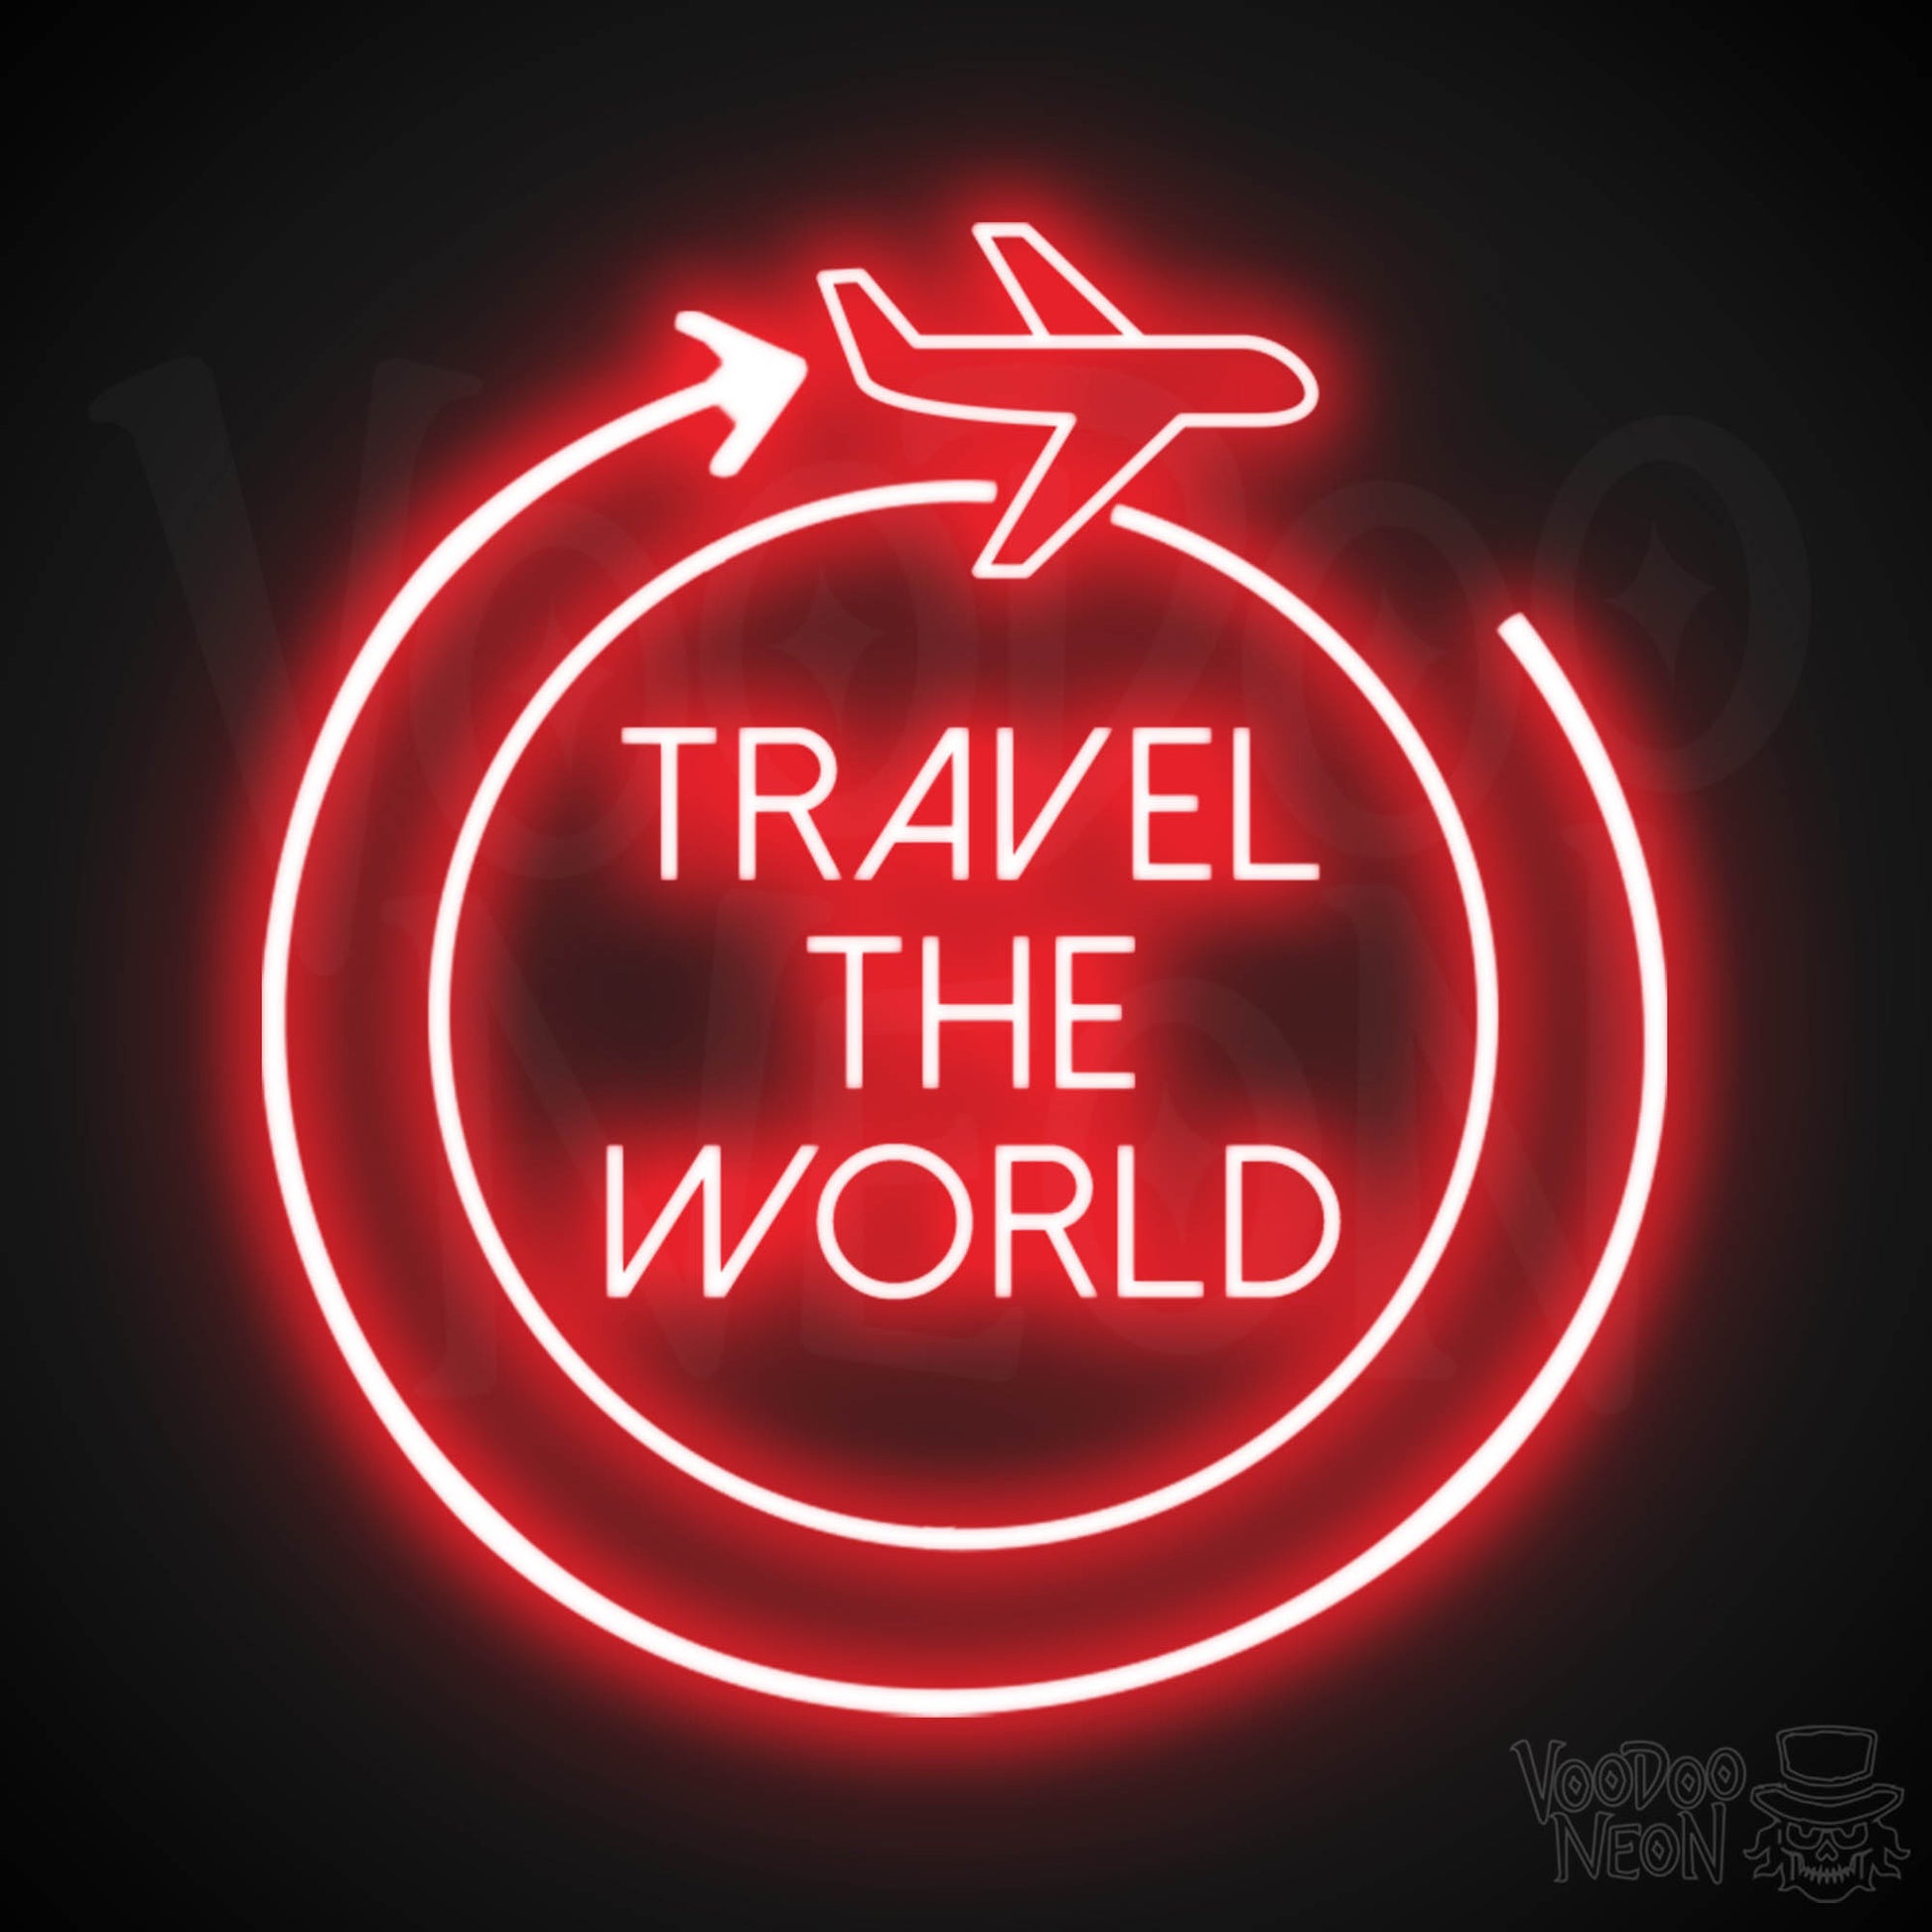 Let's Travel The World Neon Sign - LED Neon Wall Art - Color Red